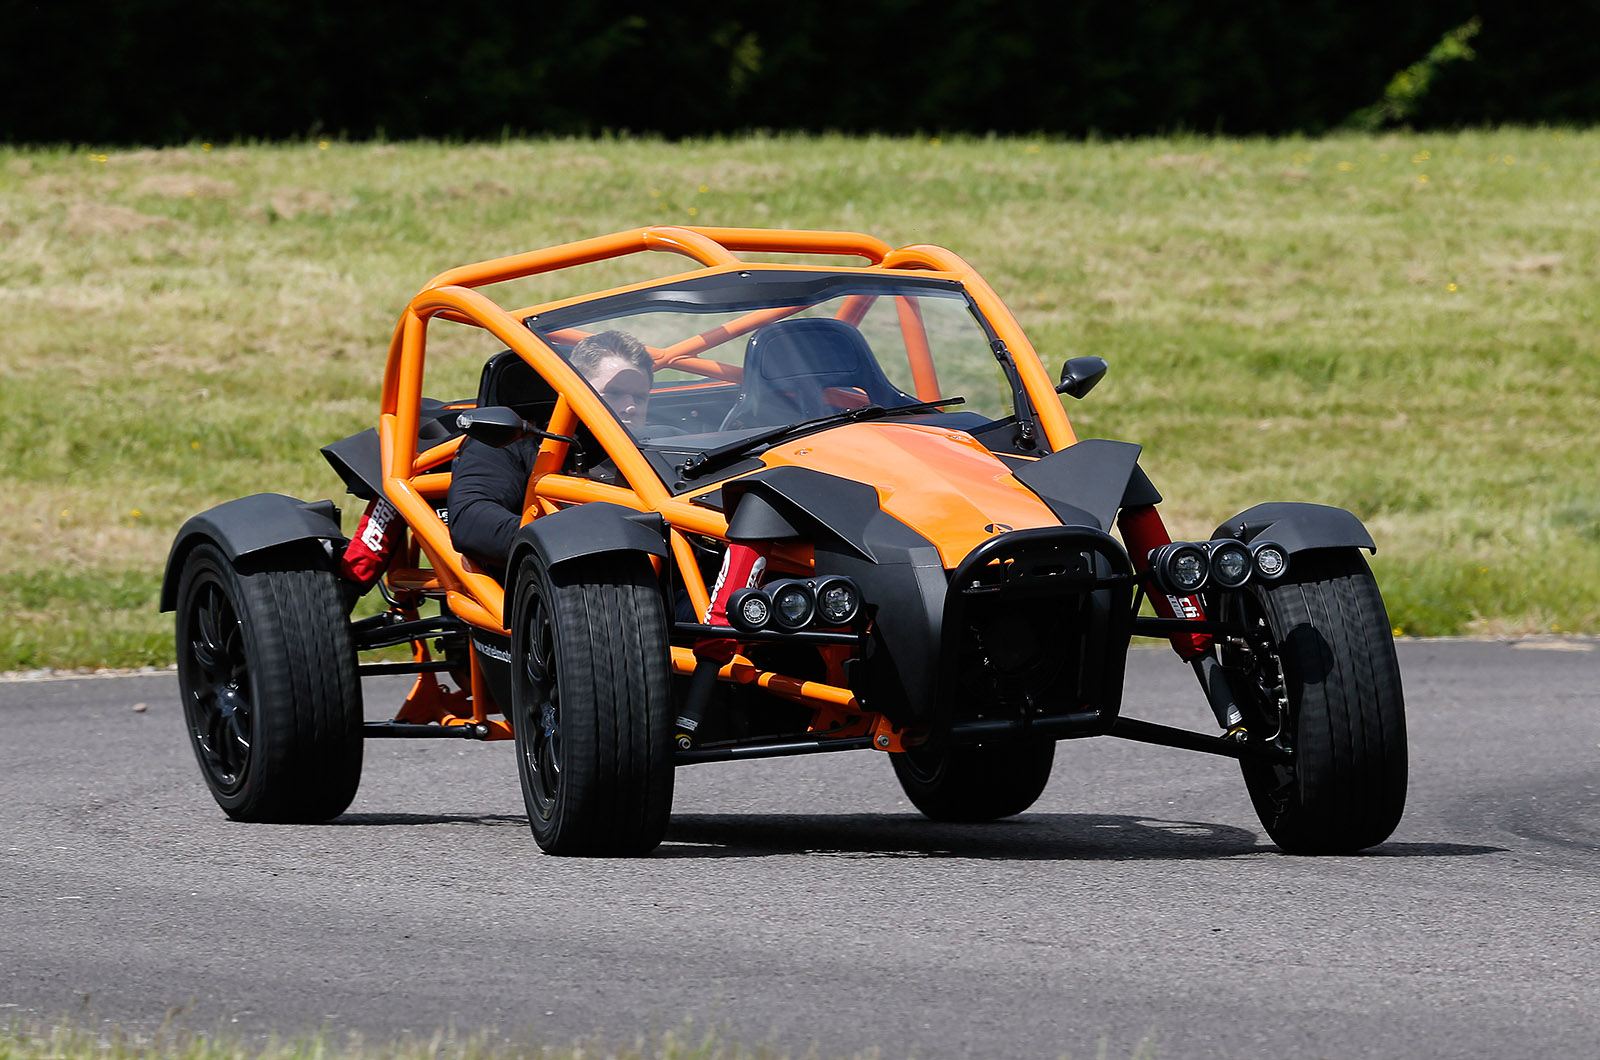 0-60mph in 4.5 secs by the Ariel Nomad